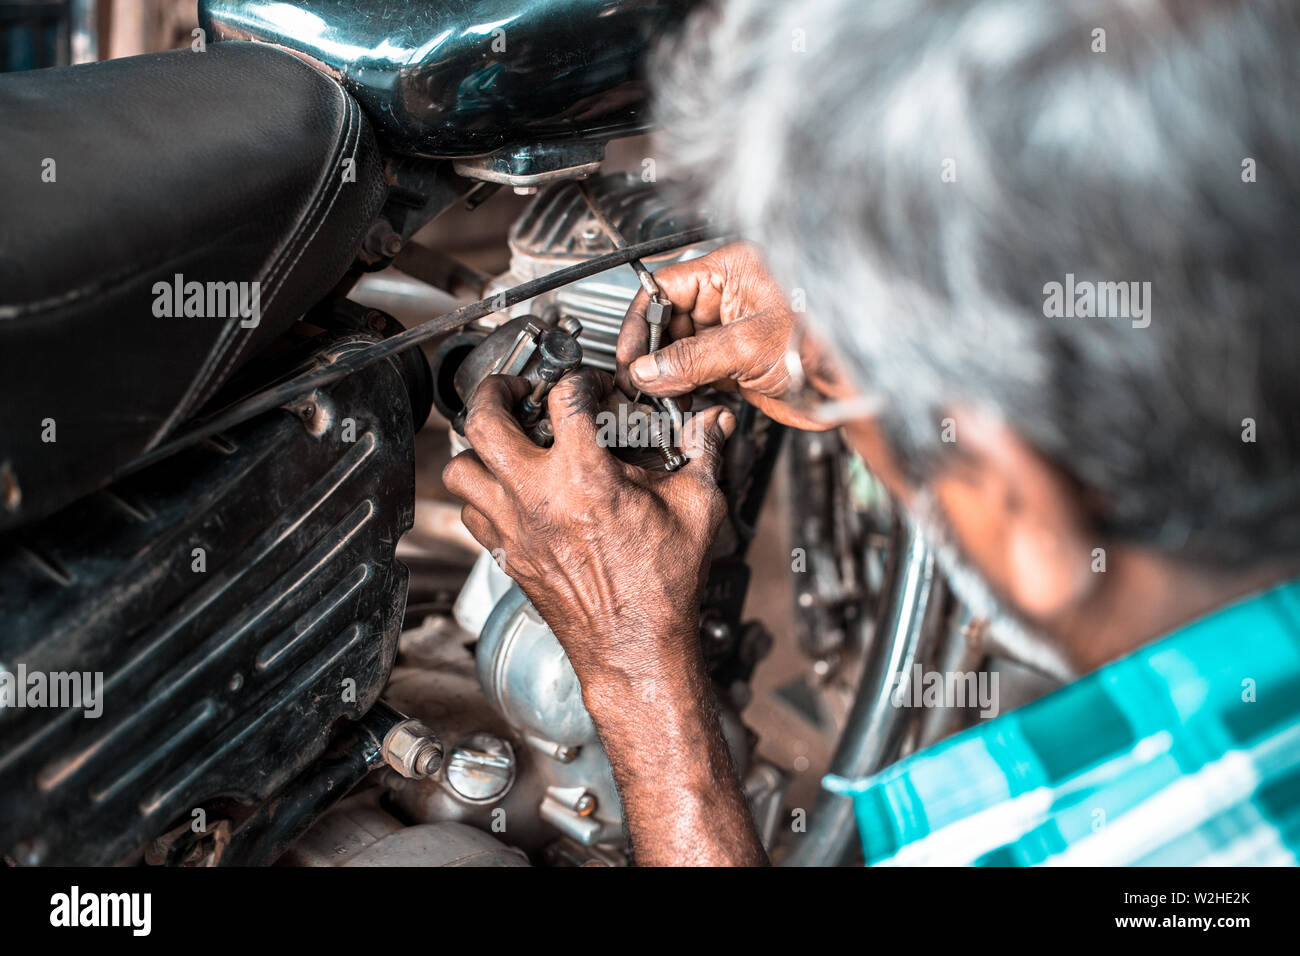 A mechanic in a small workshop in India, repairing the carburettor on an old motorcycle. Stock Photo